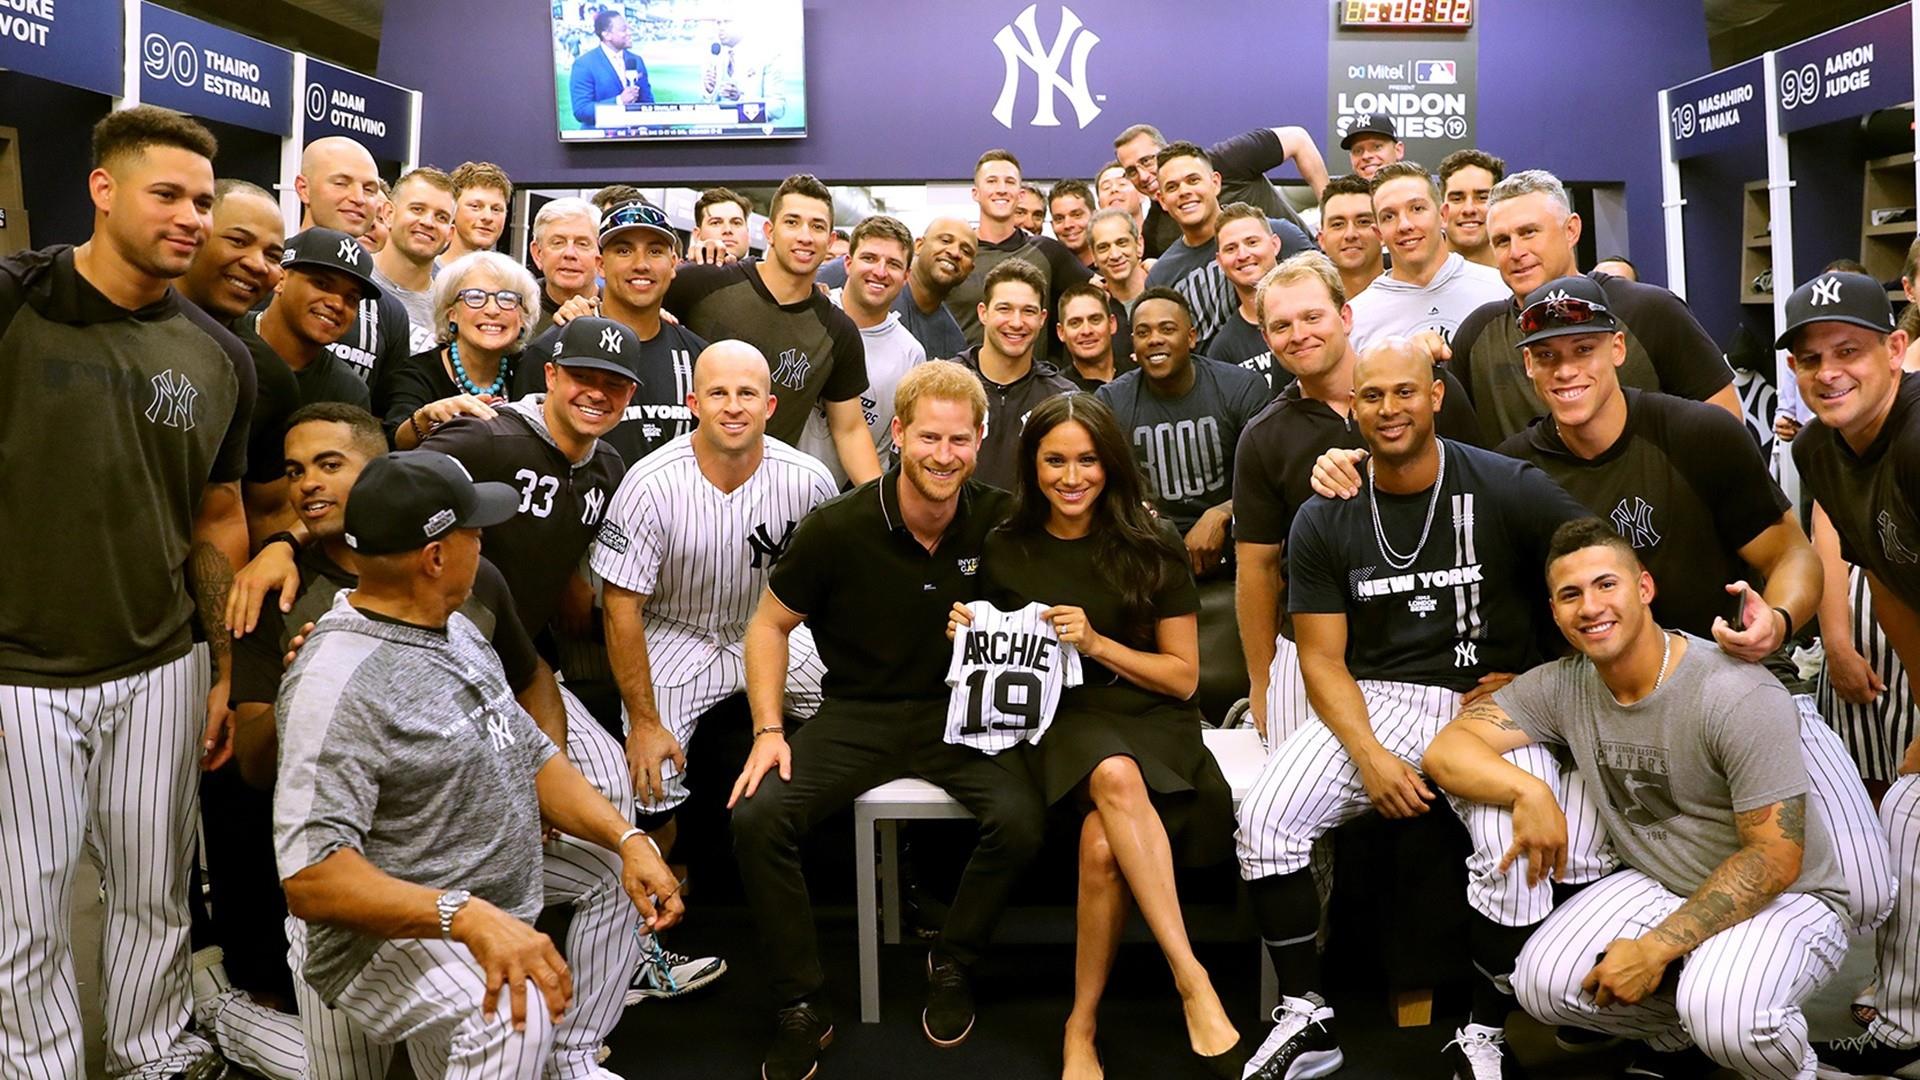 Meghan Markle breaks maternity leave to attend Red Sox versus Yankees  baseball game with Prince Harry